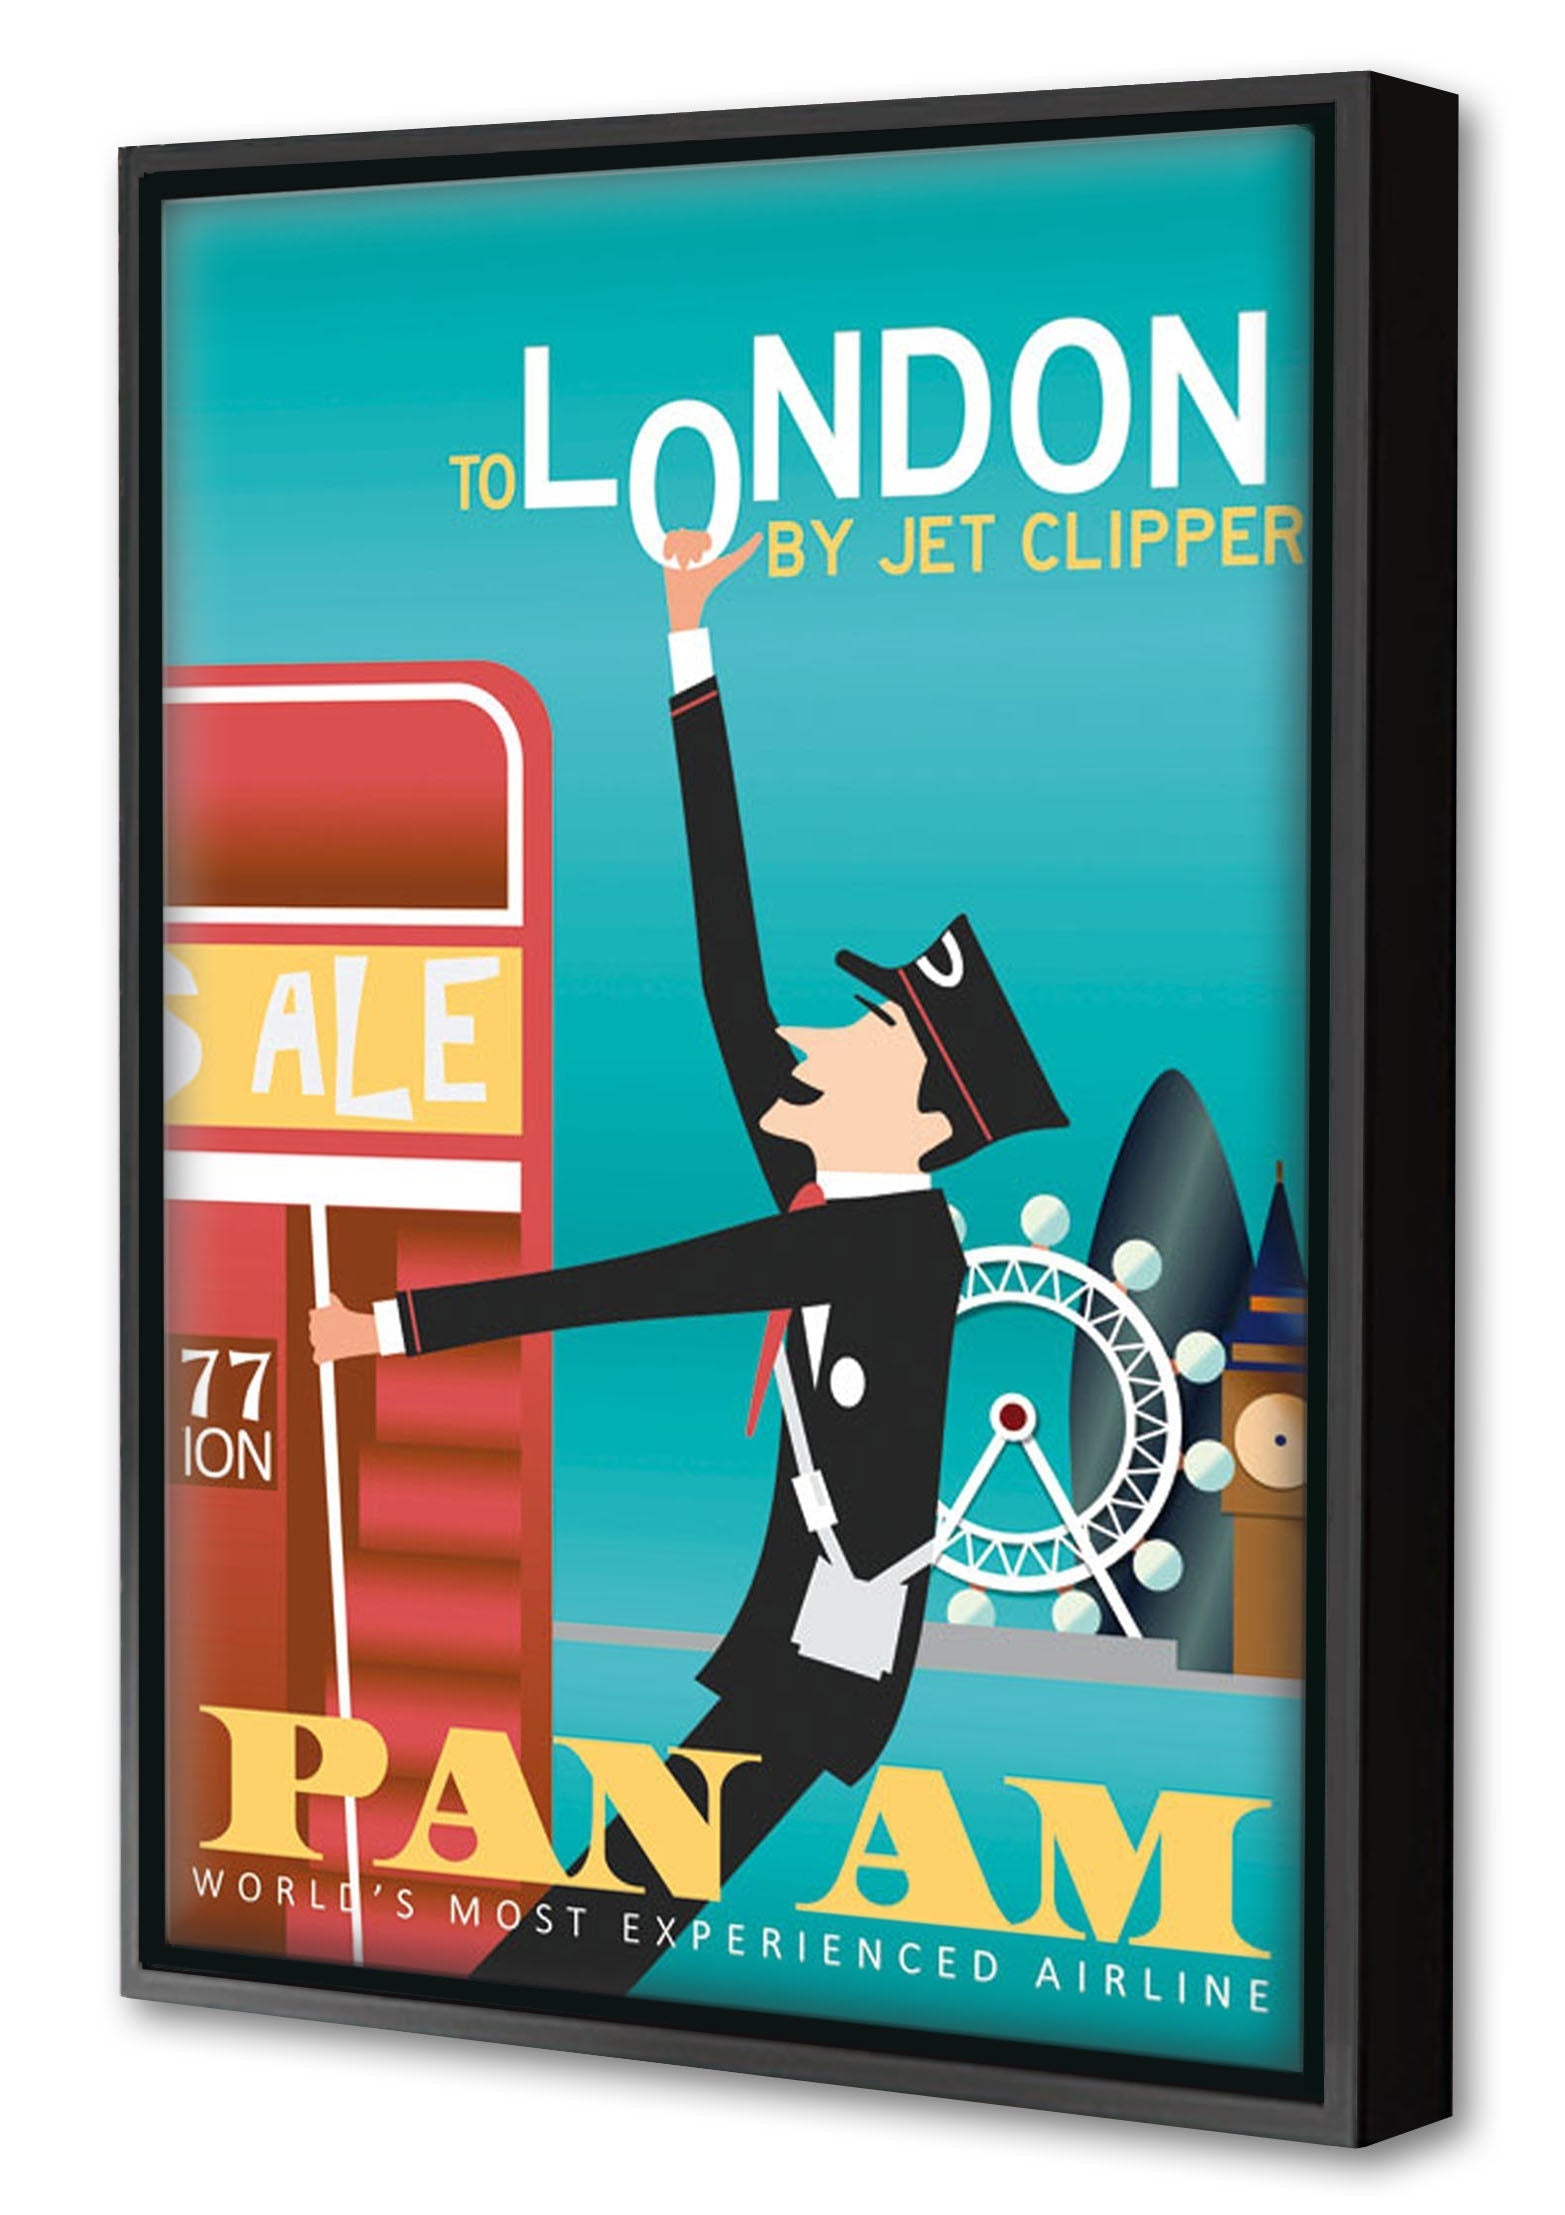 London PAN AM-airlines, print-Canvas Print with Box Frame-40 x 60 cm-BLUE SHAKER